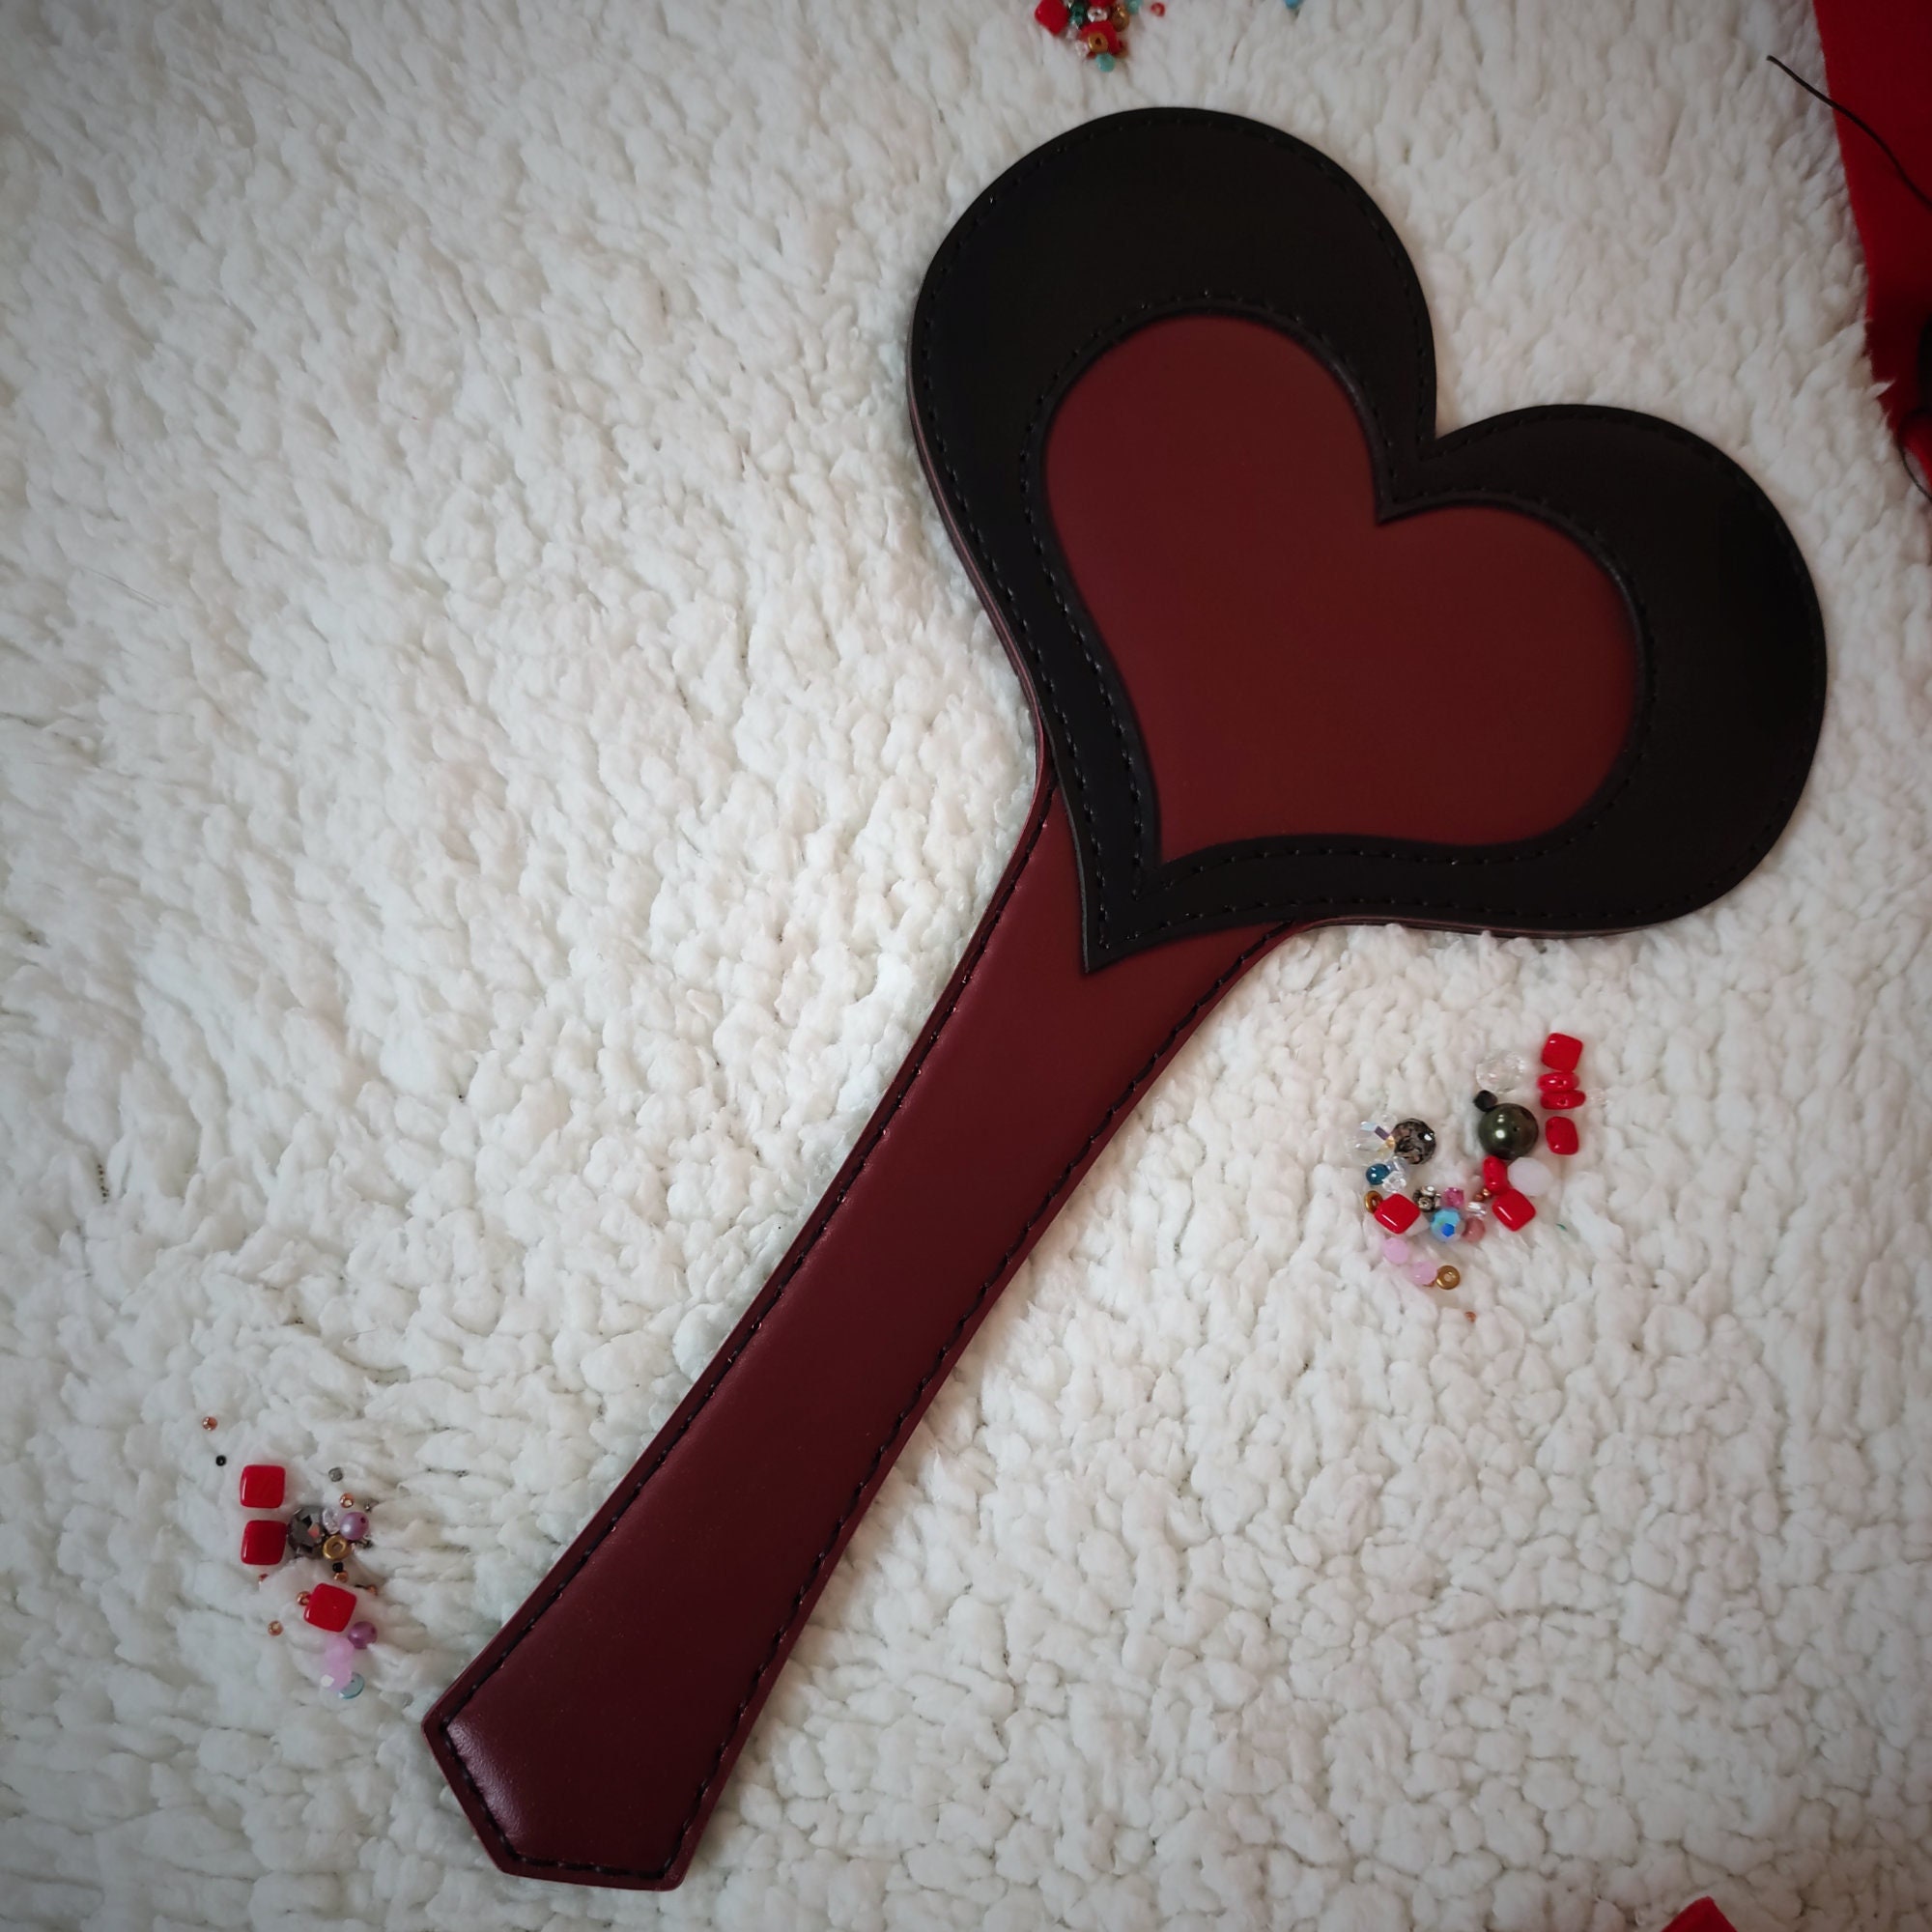 Larger Heart shaped Auction Paddle